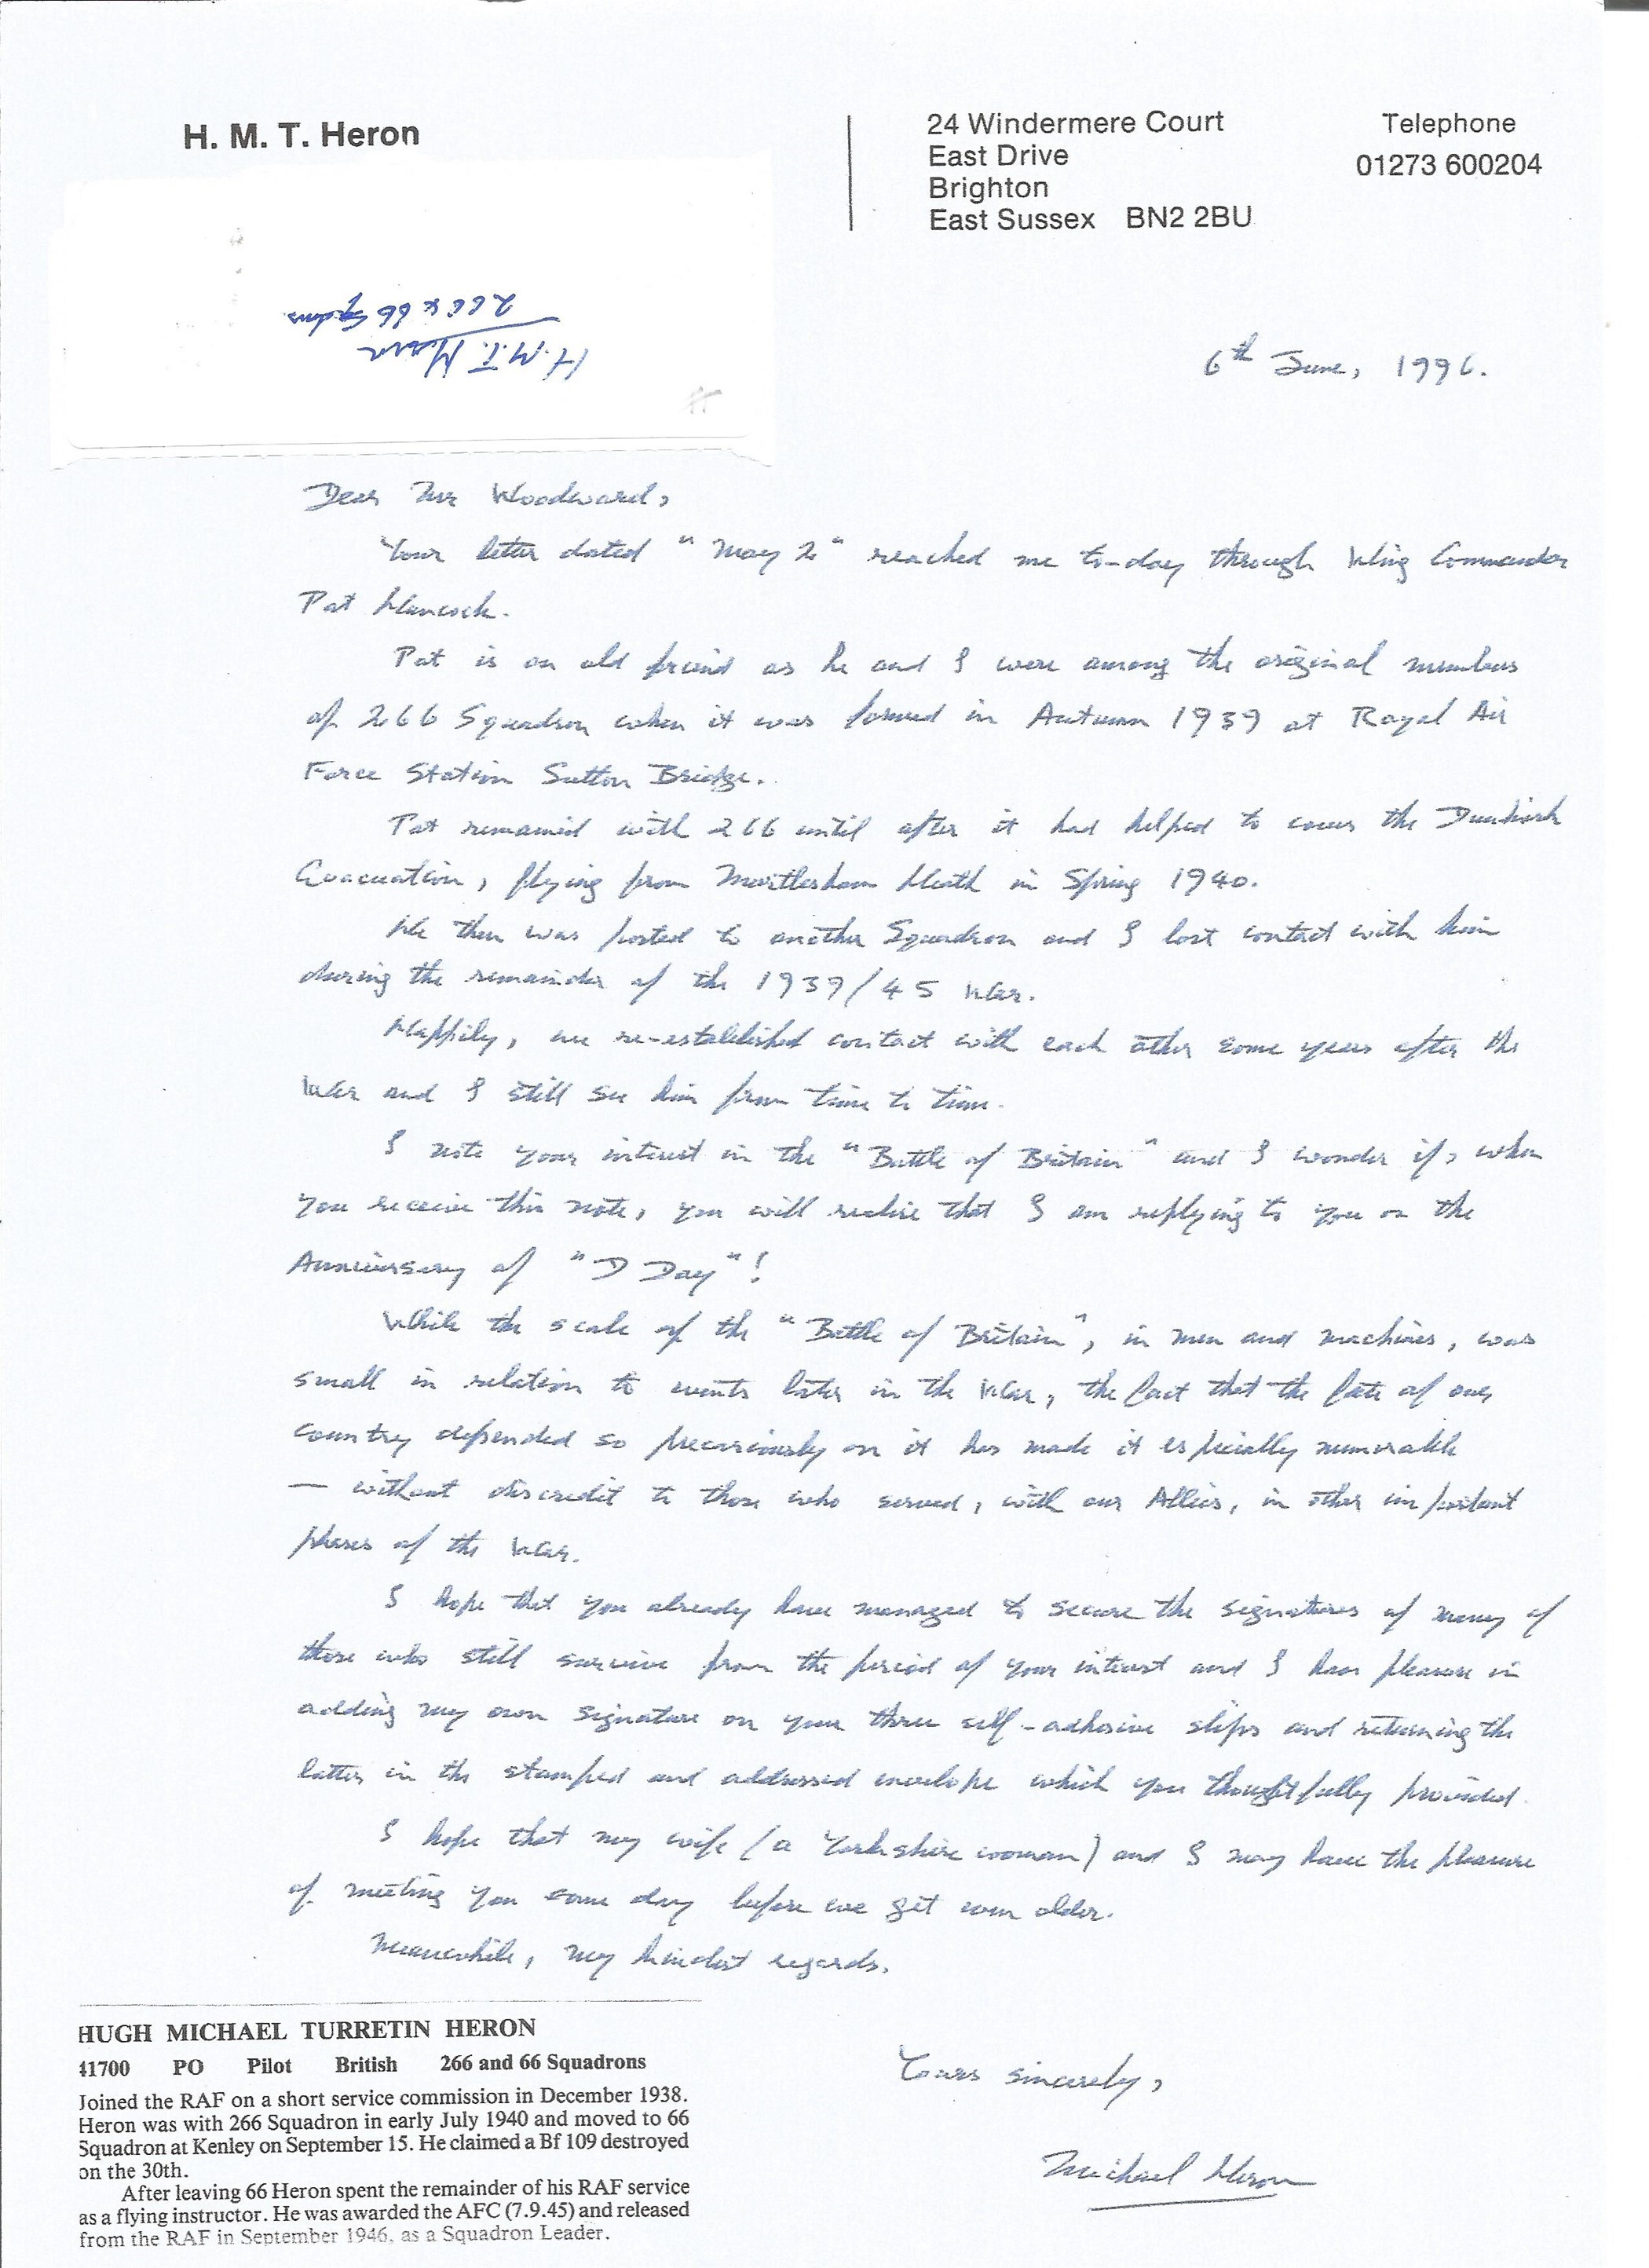 WW2 BOB fighter pilot Hugh Heron 266 sqn signature piece and copy letter with biography details